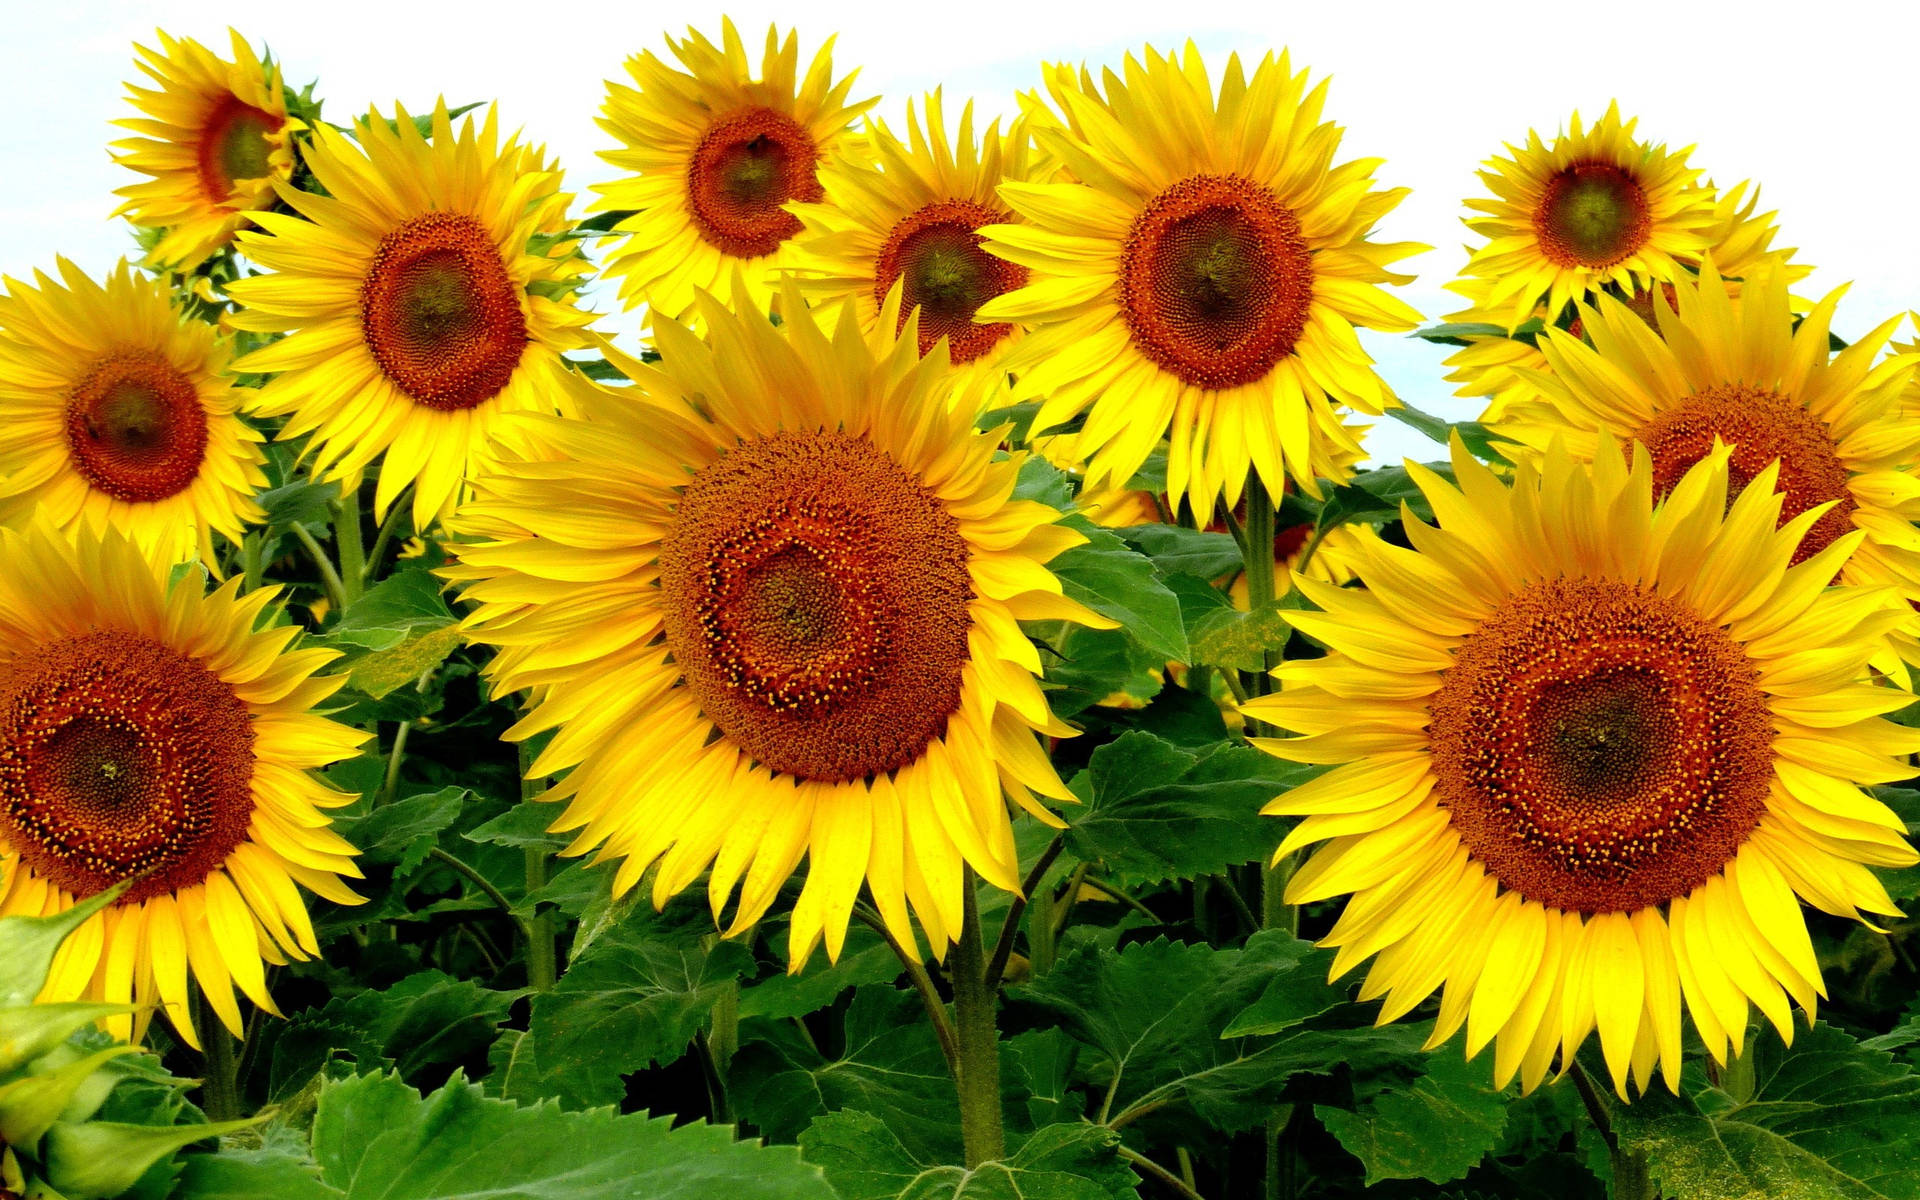 Bringing the Outdoors Inside with a Beautiful Sunflower Desktop Wallpaper